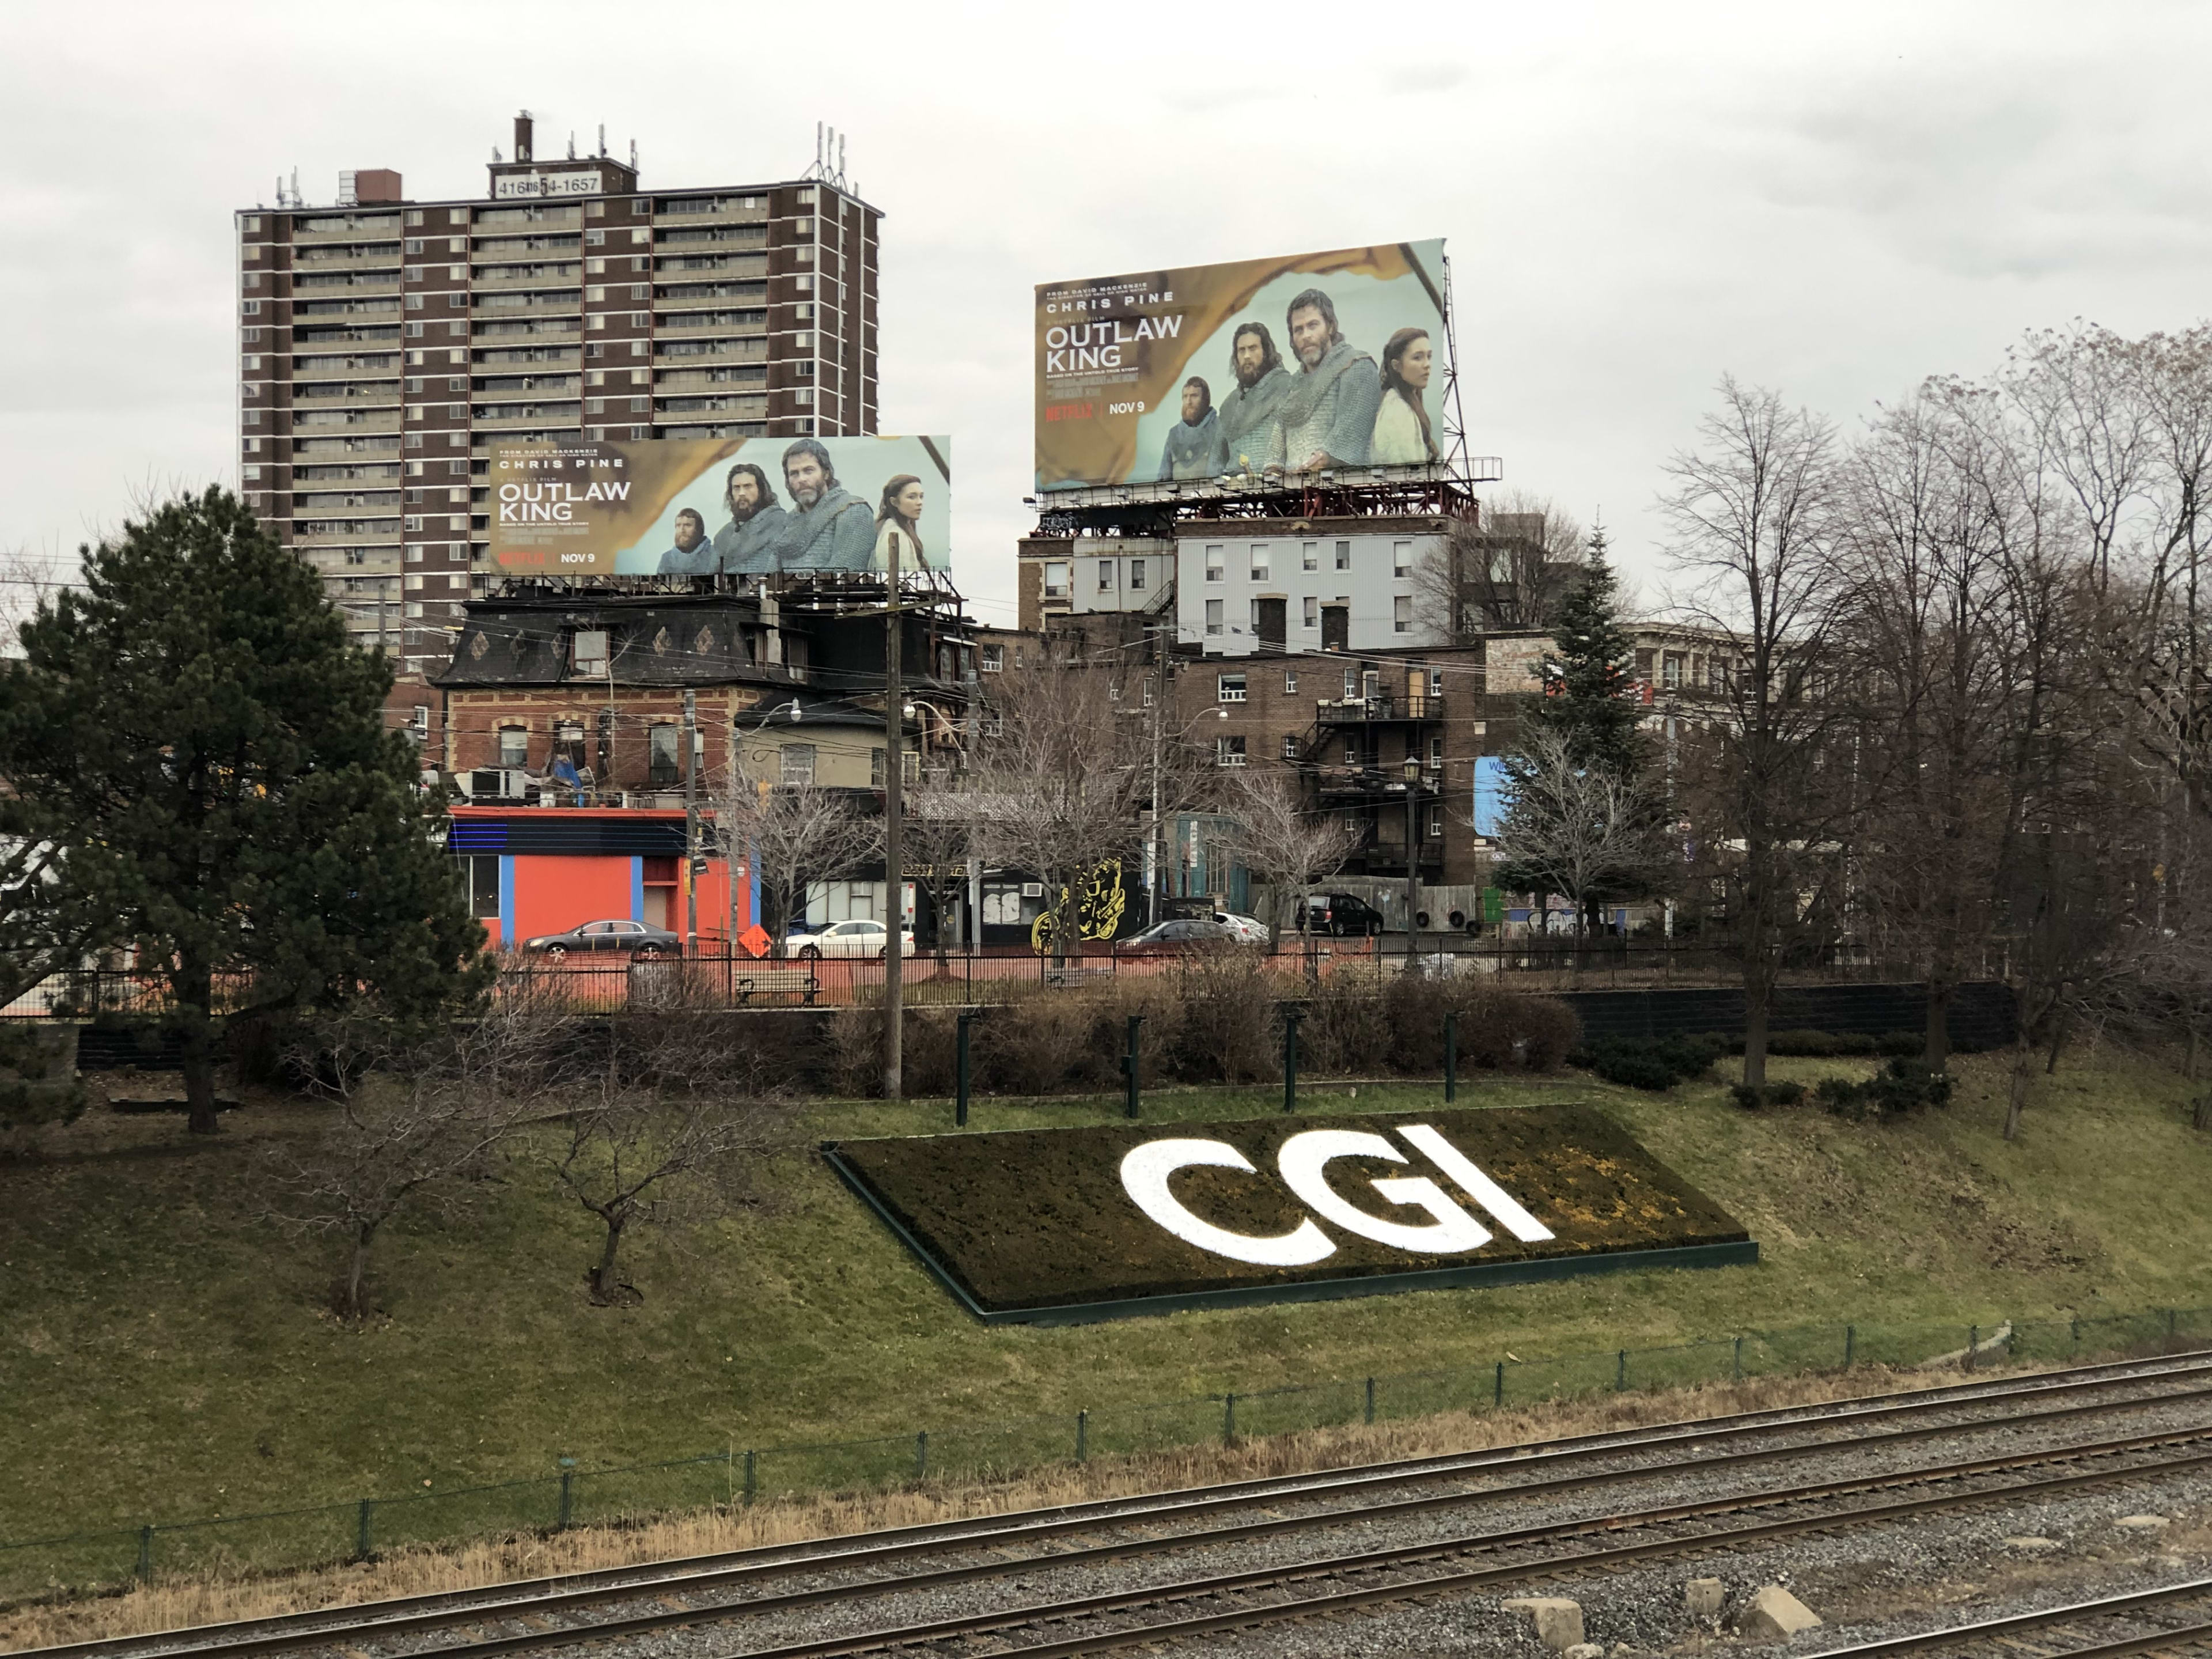 A corporate logo promoting CGI sits on the well tended hillside. Tracks run just in front of the ...